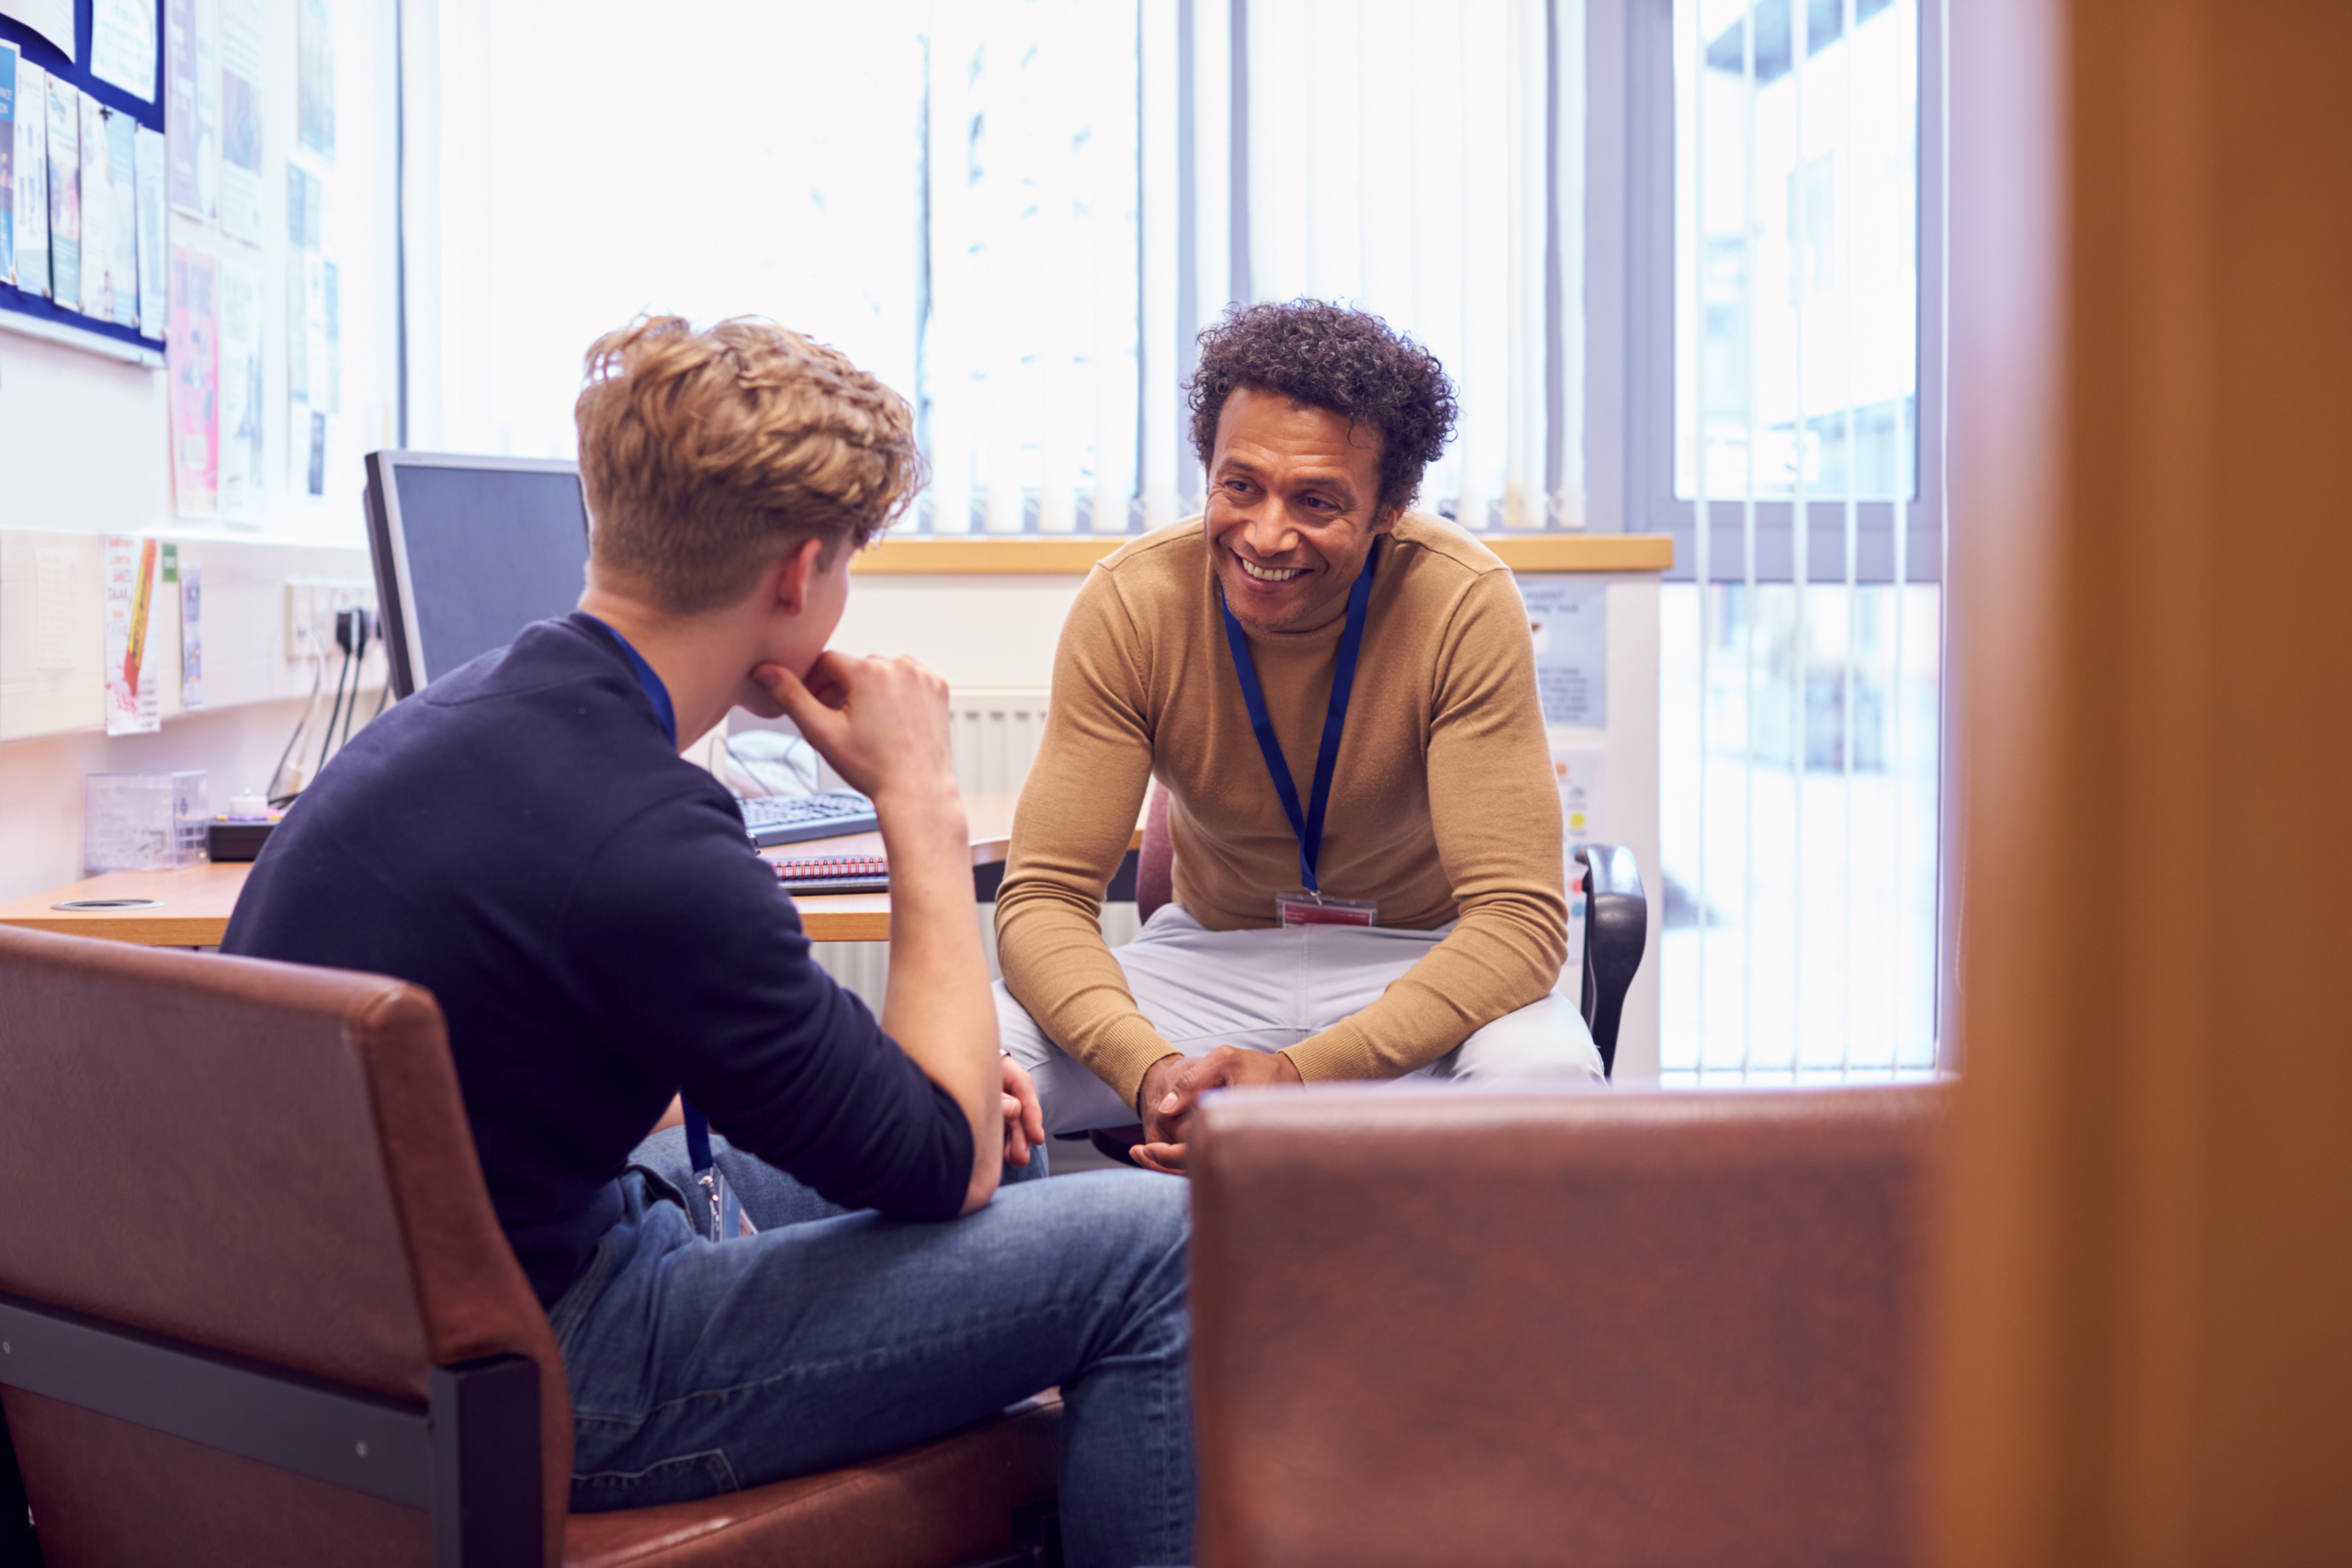 A man meets with a counselor. Being able to have open, healthy conversations about feelings and struggles is a key part of the mental health messaging during suicide prevention month.